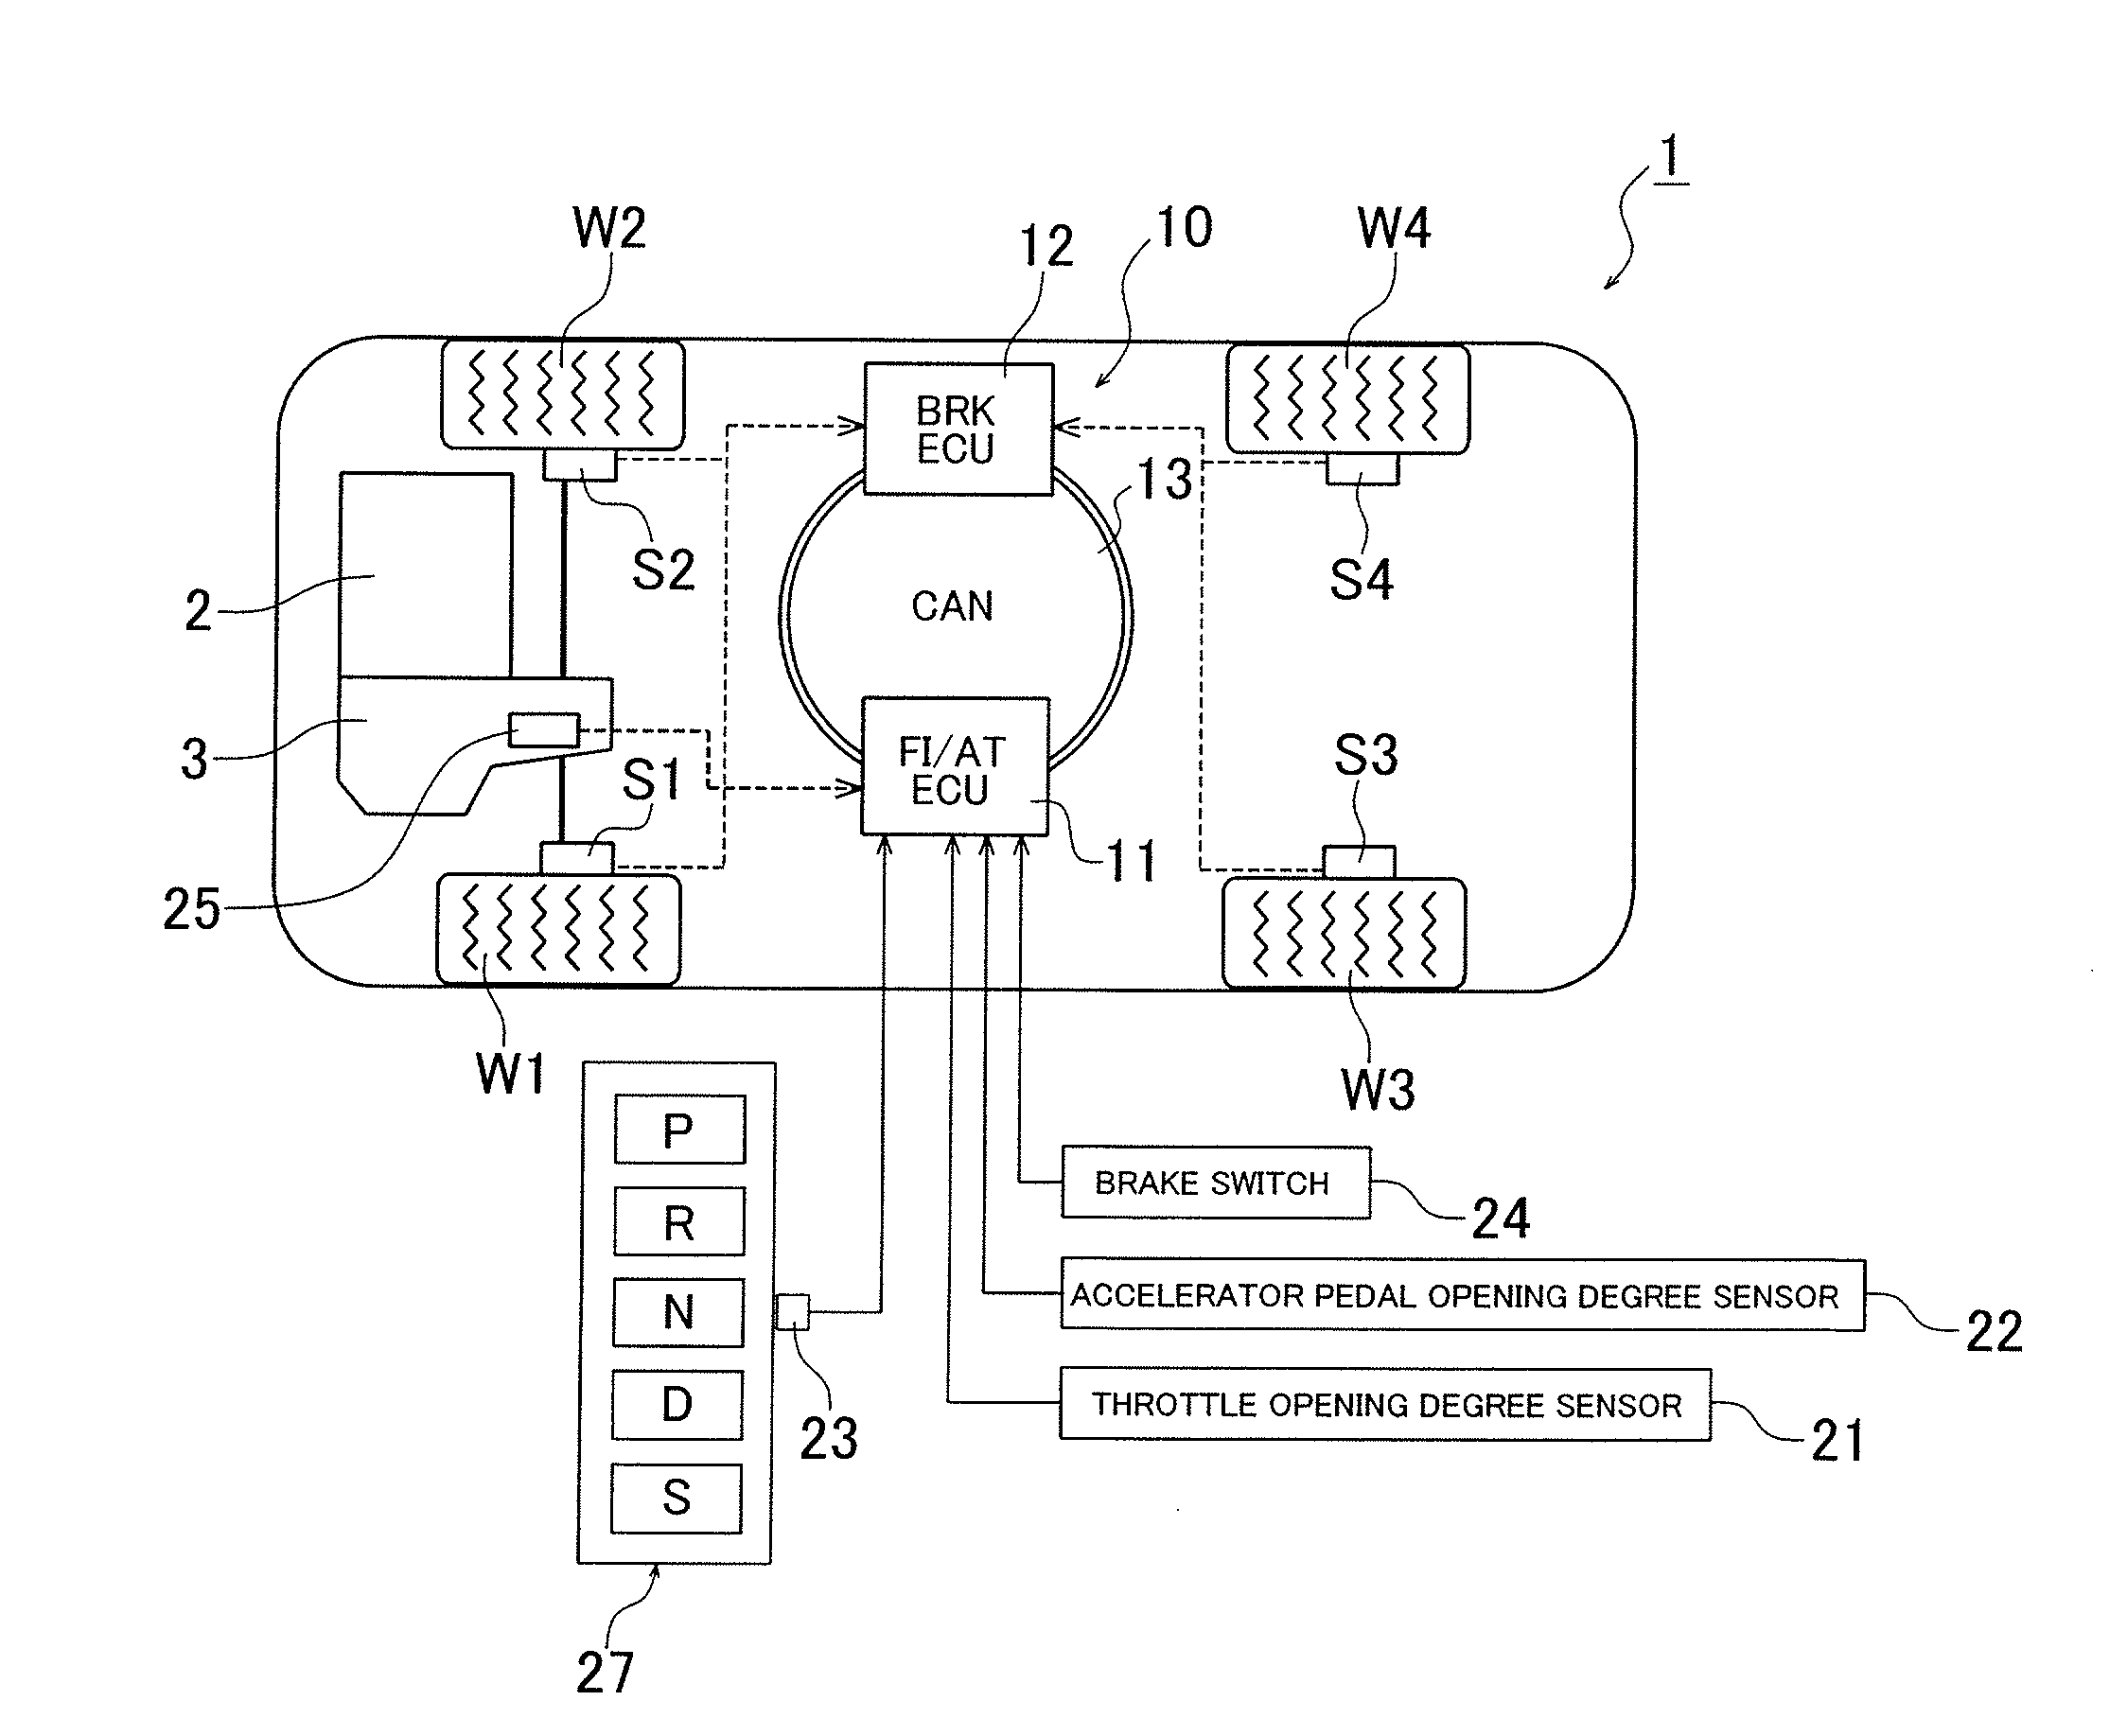 Control apparatus for vehicle automatic transmission